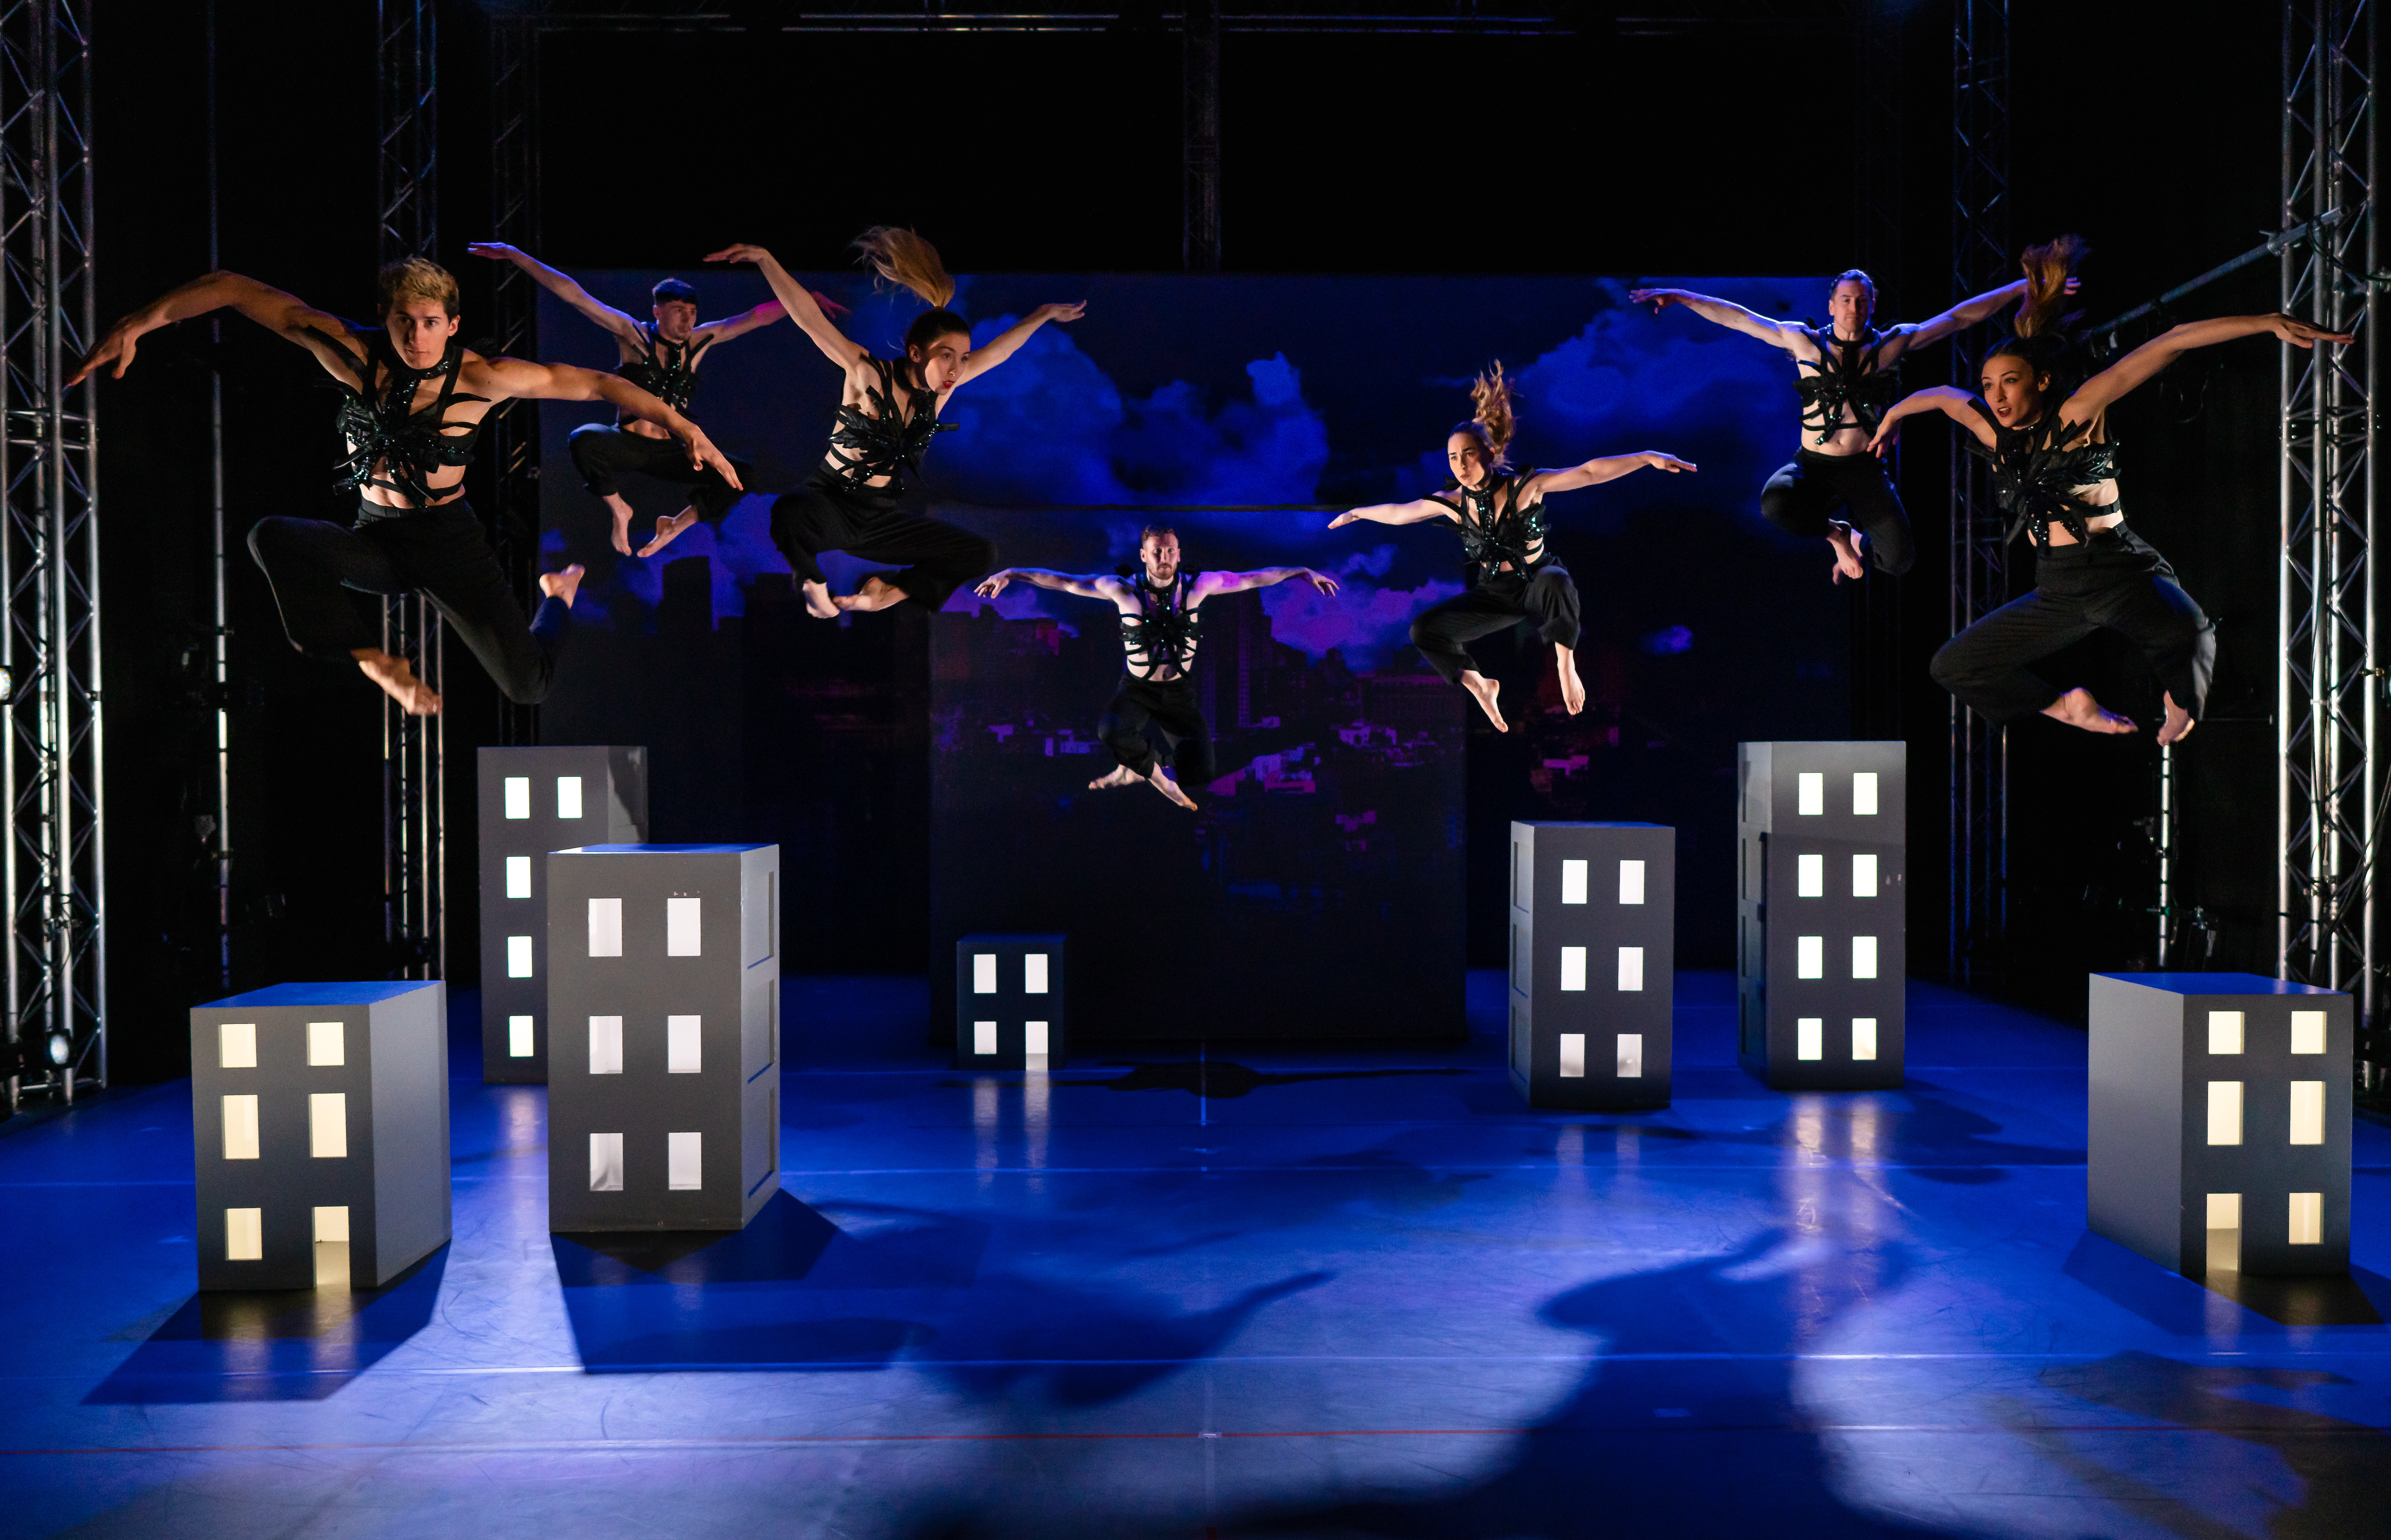 Additional gallery picture 1, Nobody by Motionhouse, image credit Dan Tucker